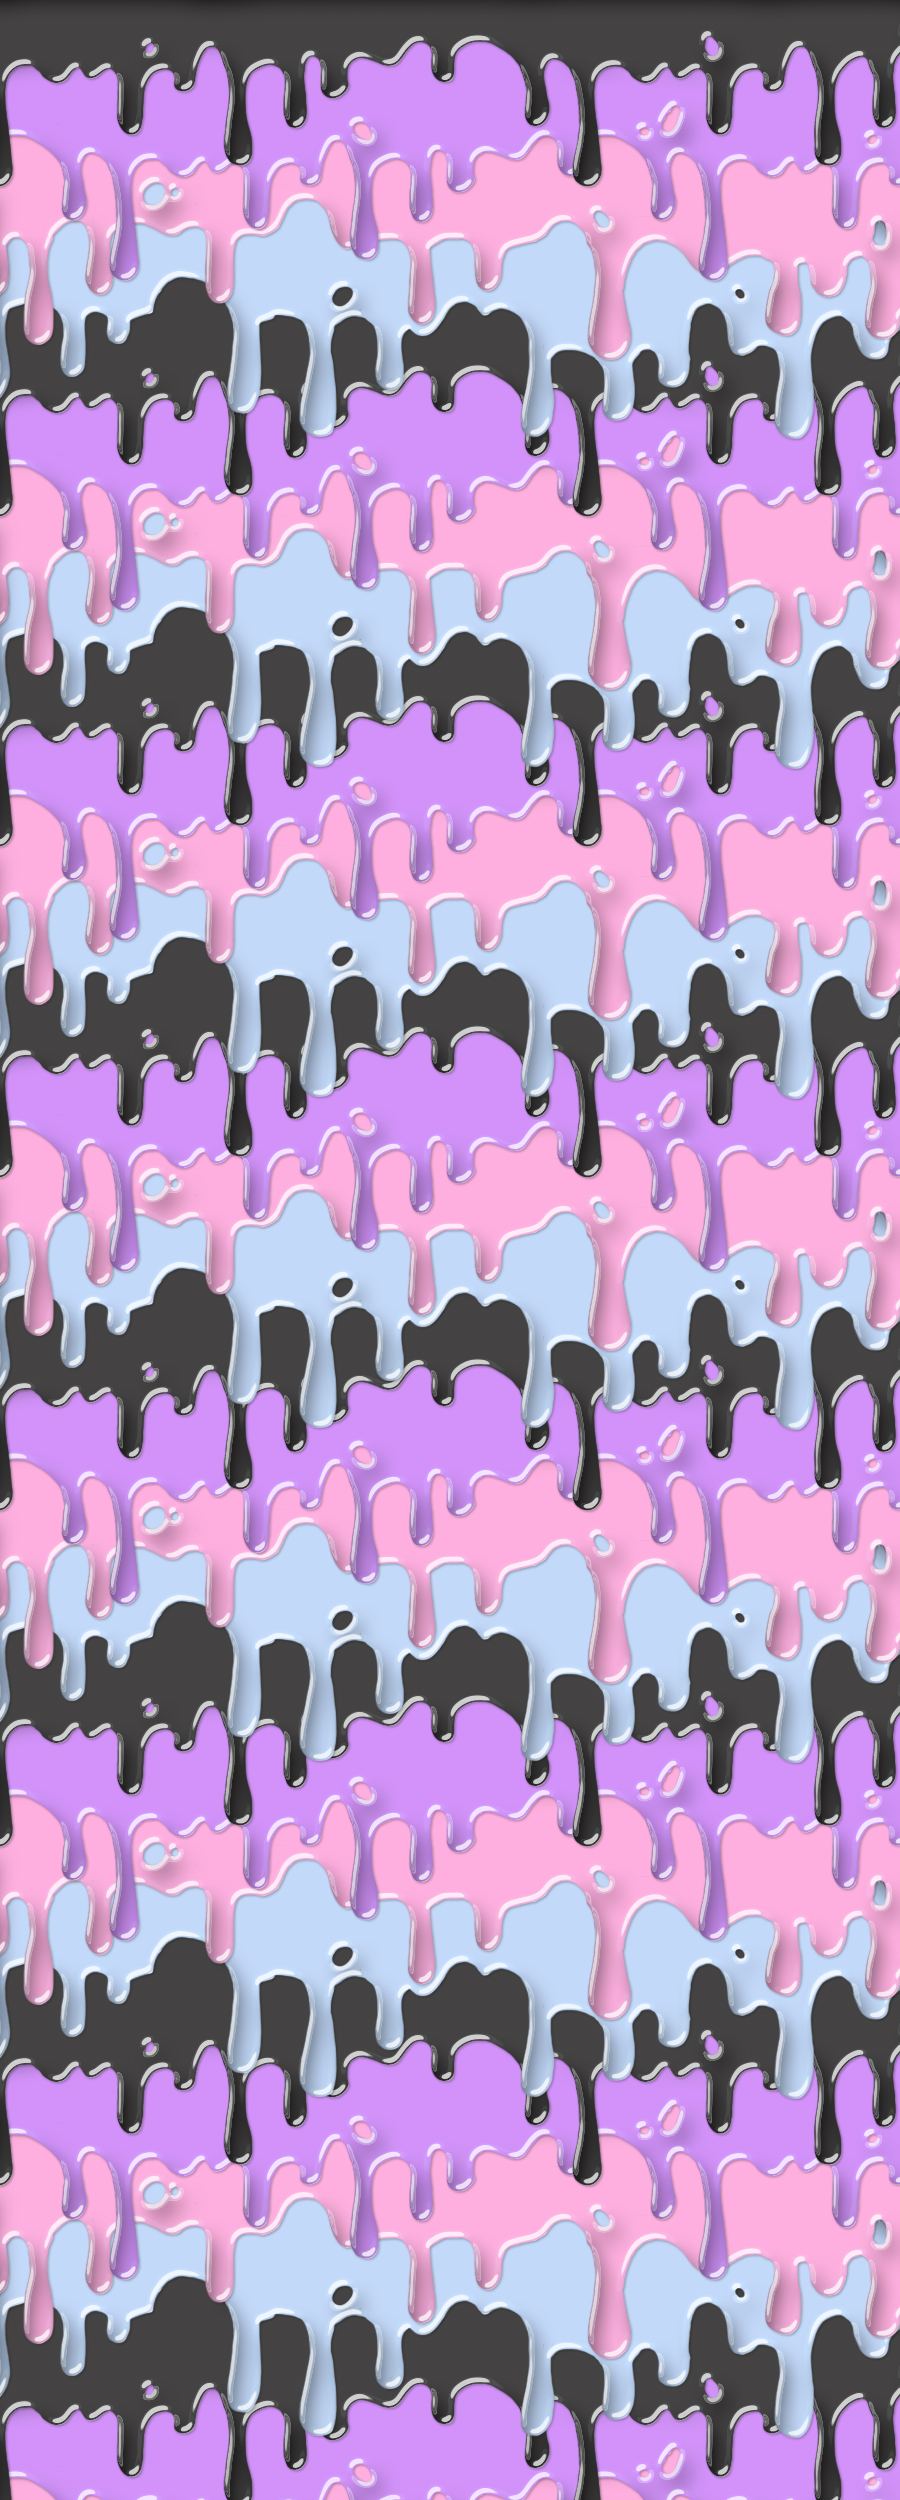 Pastel Goth Backgrounds Skinny love by percyfapson